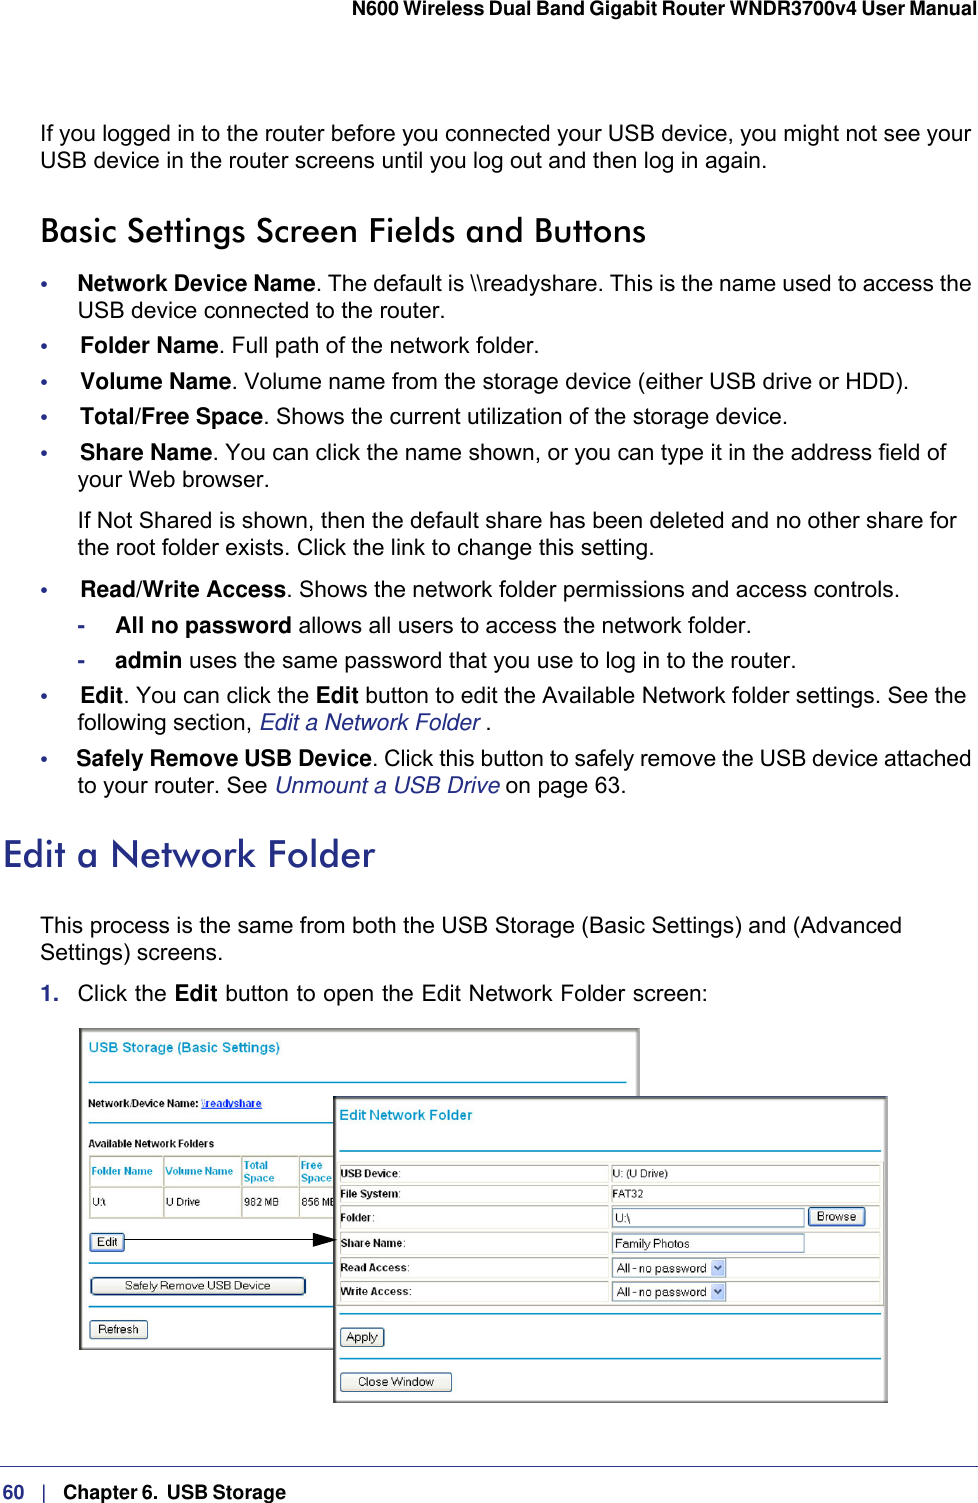 60   |   Chapter 6.  USB Storage  N600 Wireless Dual Band Gigabit Router WNDR3700v4 User Manual If you logged in to the router before you connected your USB device, you might not see your USB device in the router screens until you log out and then log in again.Basic Settings Screen Fields and Buttons•     Network Device Name. The default is \\readyshare. This is the name used to access the USB device connected to the router.•     Folder Name. Full path of the network folder. •     Volume Name. Volume name from the storage device (either USB drive or HDD). •     Total/Free Space. Shows the current utilization of the storage device. •     Share Name. You can click the name shown, or you can type it in the address field of your Web browser.If Not Shared is shown, then the default share has been deleted and no other share for the root folder exists. Click the link to change this setting.•     Read/Write Access. Shows the network folder permissions and access controls.-All no password allows all users to access the network folder. -admin uses the same password that you use to log in to the router. •     Edit. You can click the Edit button to edit the Available Network folder settings. See the following section, Edit a Network Folder .•     Safely Remove USB Device. Click this button to safely remove the USB device attached to your router. See Unmount a USB Drive on page  63.Edit a Network FolderThis process is the same from both the USB Storage (Basic Settings) and (Advanced Settings) screens. 1.  Click the Edit button to open the Edit Network Folder screen: